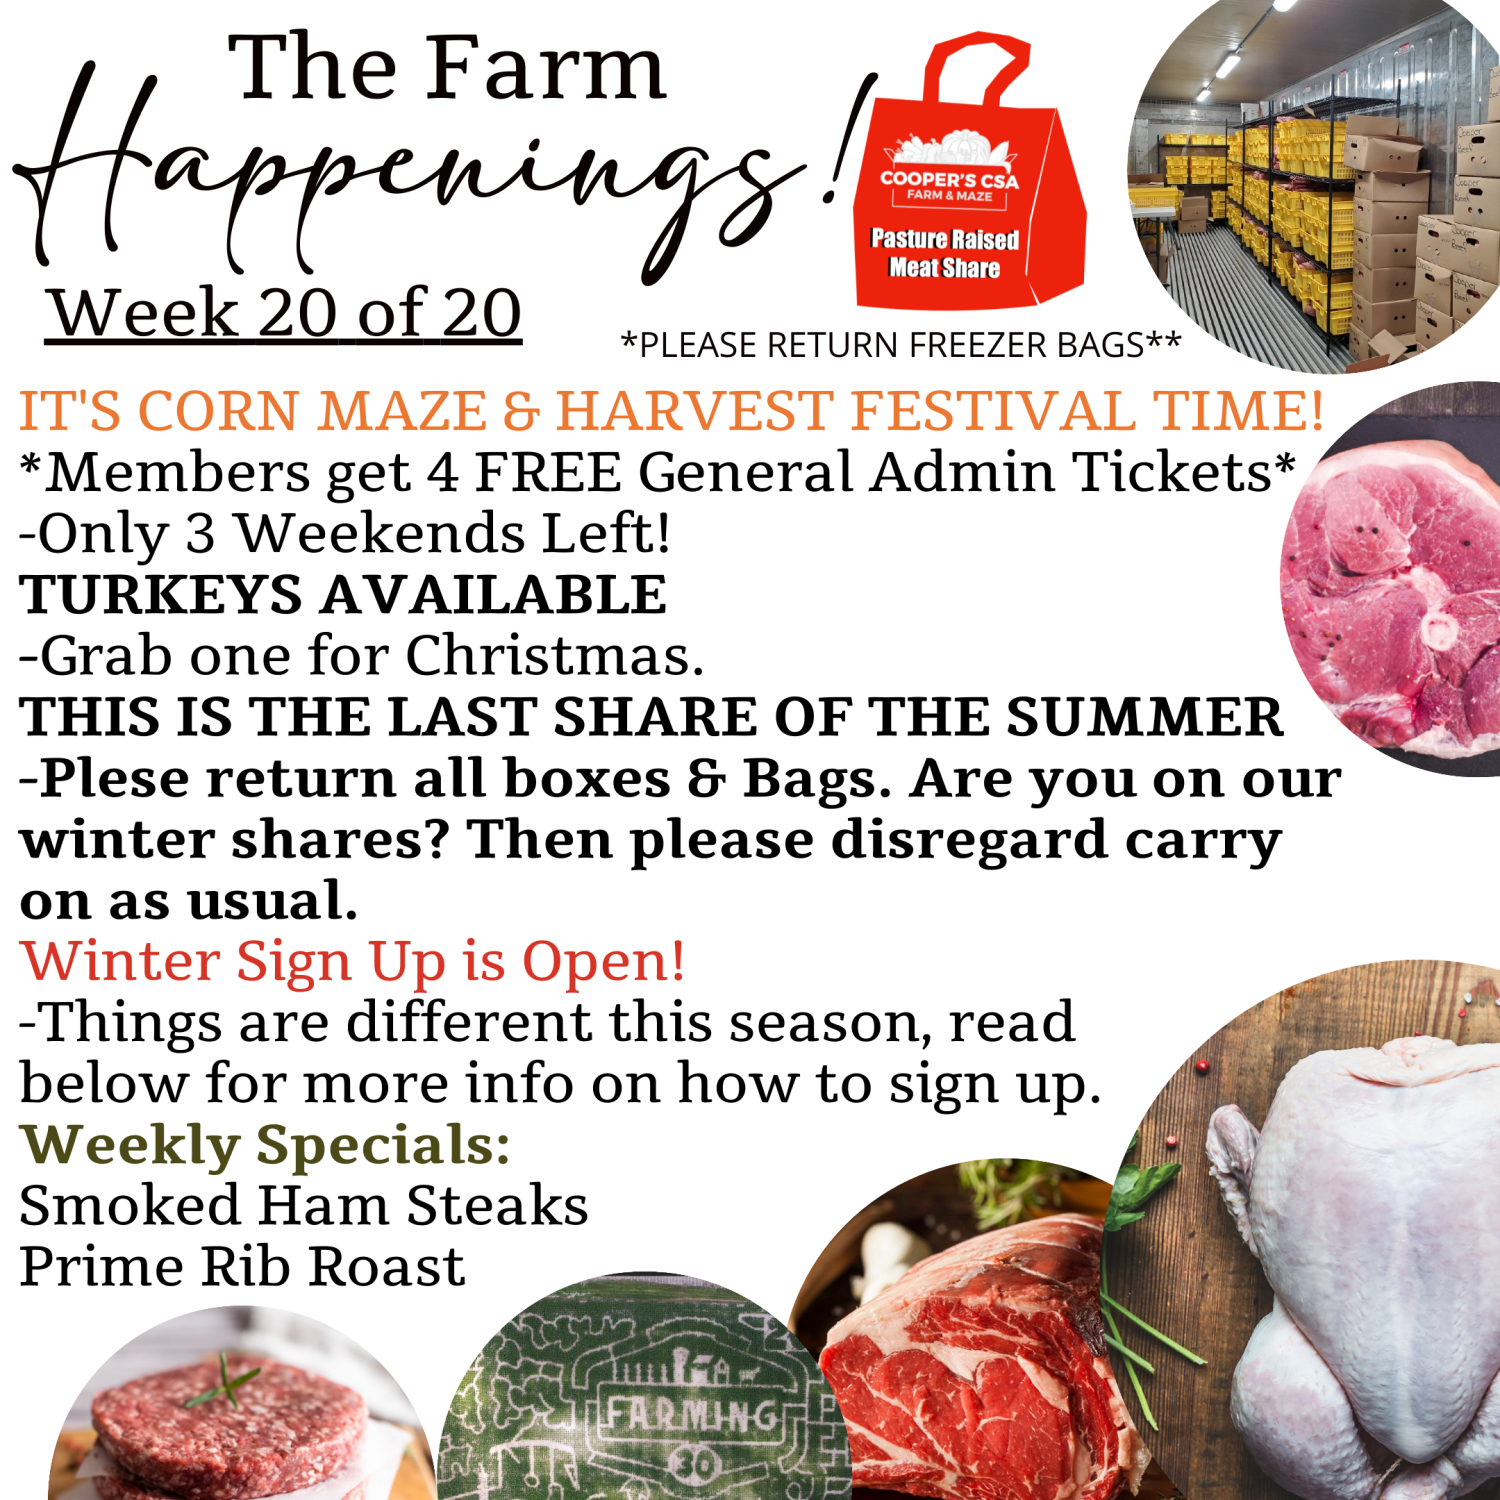 Previous Happening: "Pasture Meat Shares"-Coopers CSA Farm Farm Happenings Week 20